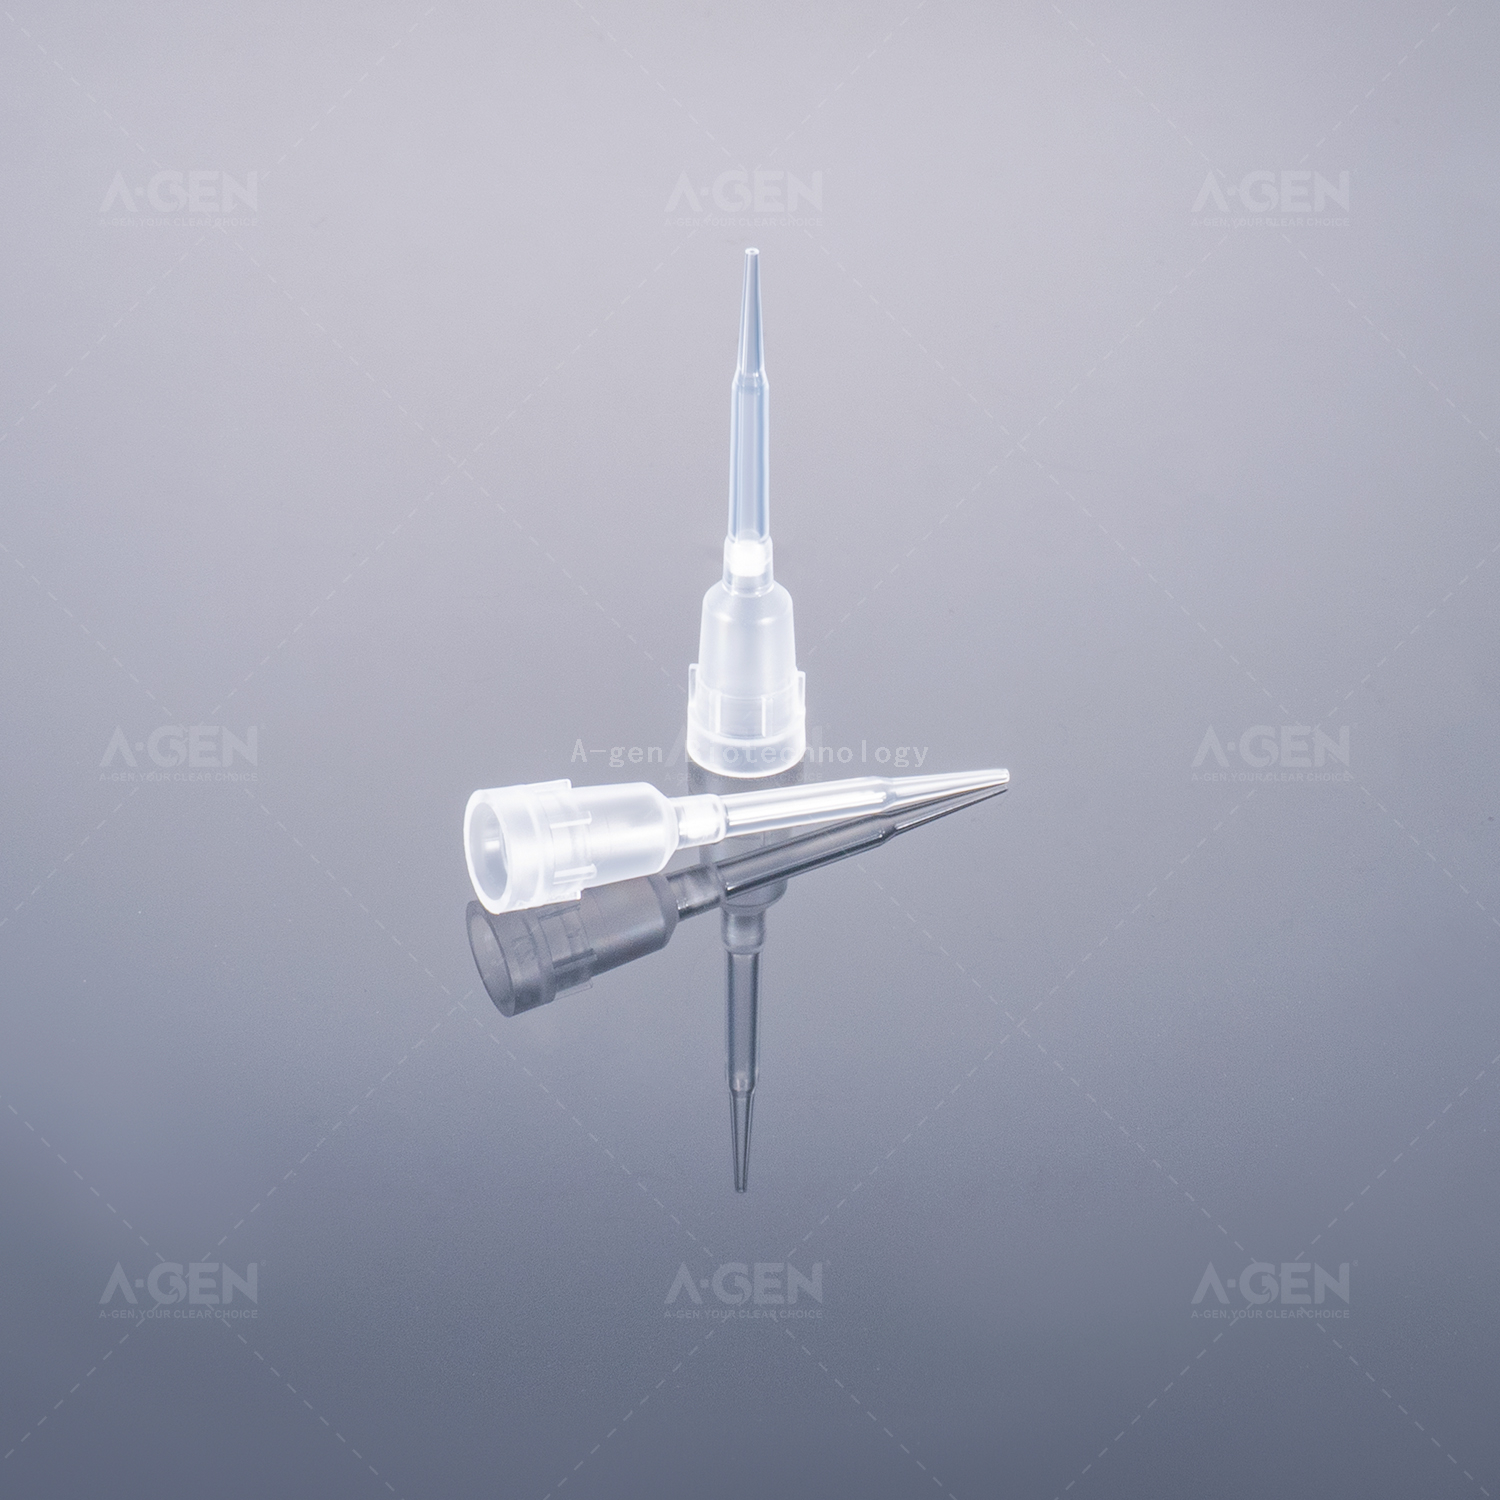 Tecan LiHa 20μL Transparent PP Pipette Tip (Racked,sterilized) for Liquid Transfer With Filter TTF-20-RSL Low Residual